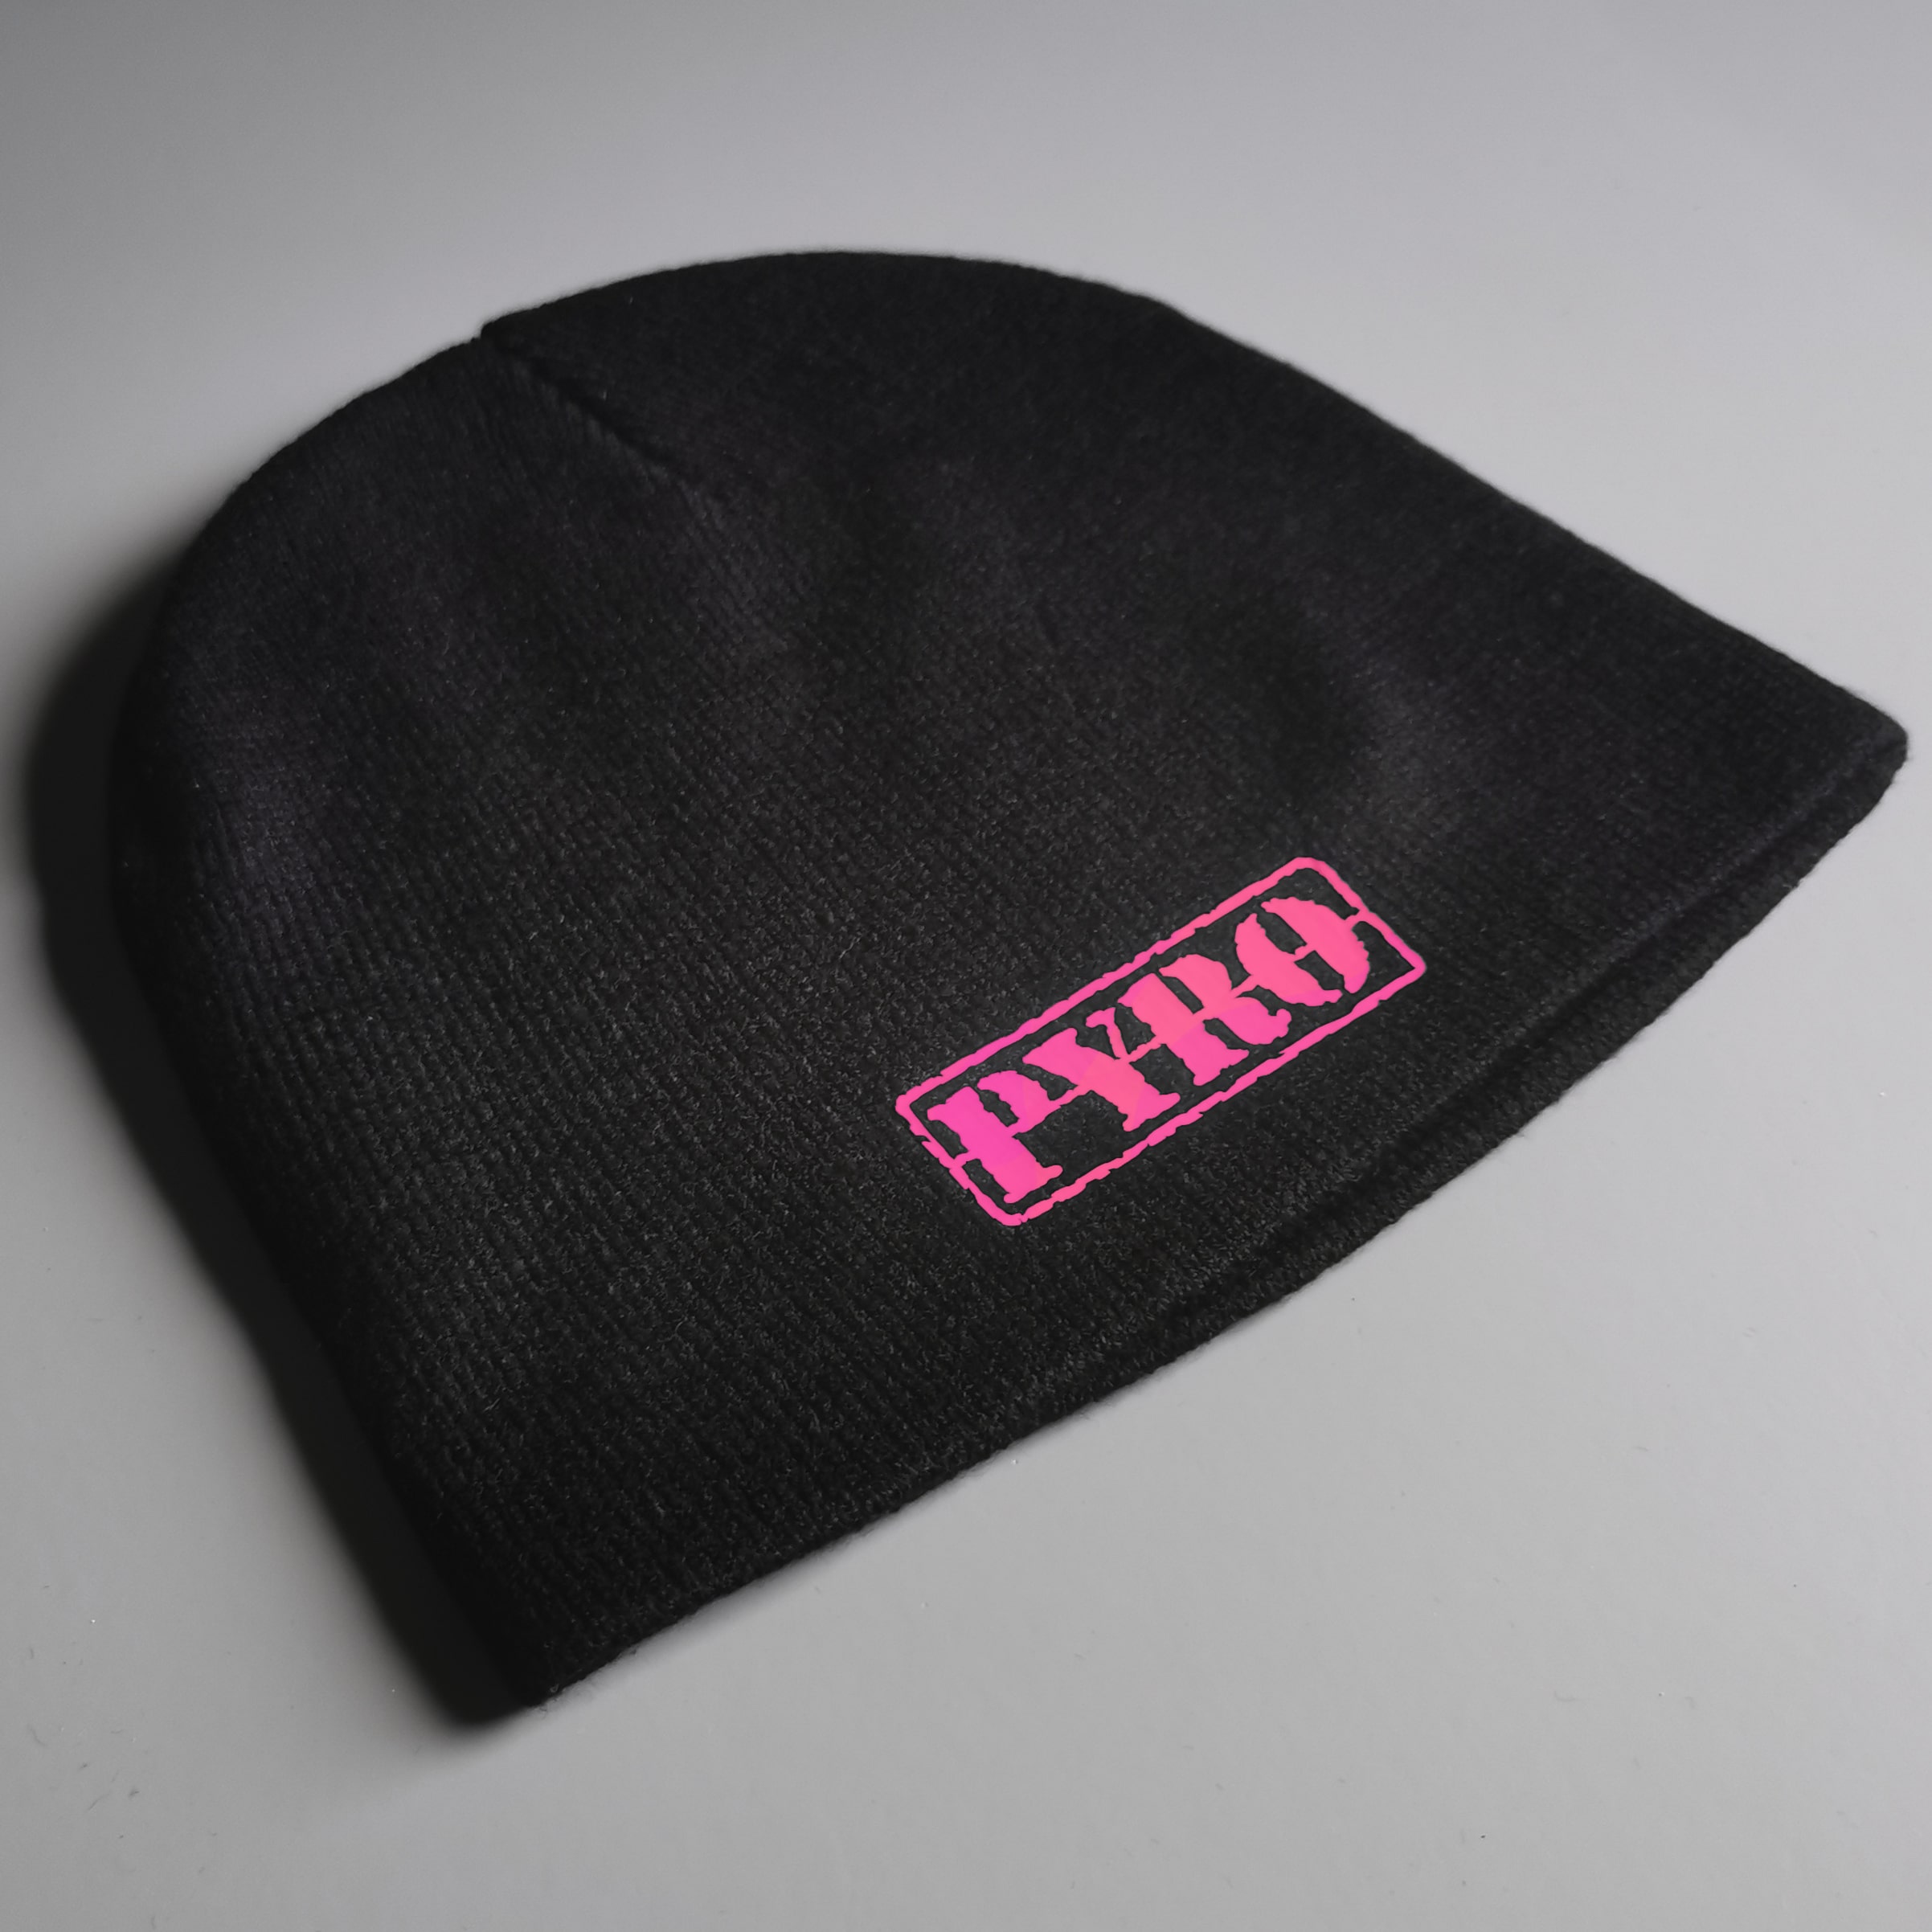 PYRO Beanie (4 color options) - Hat